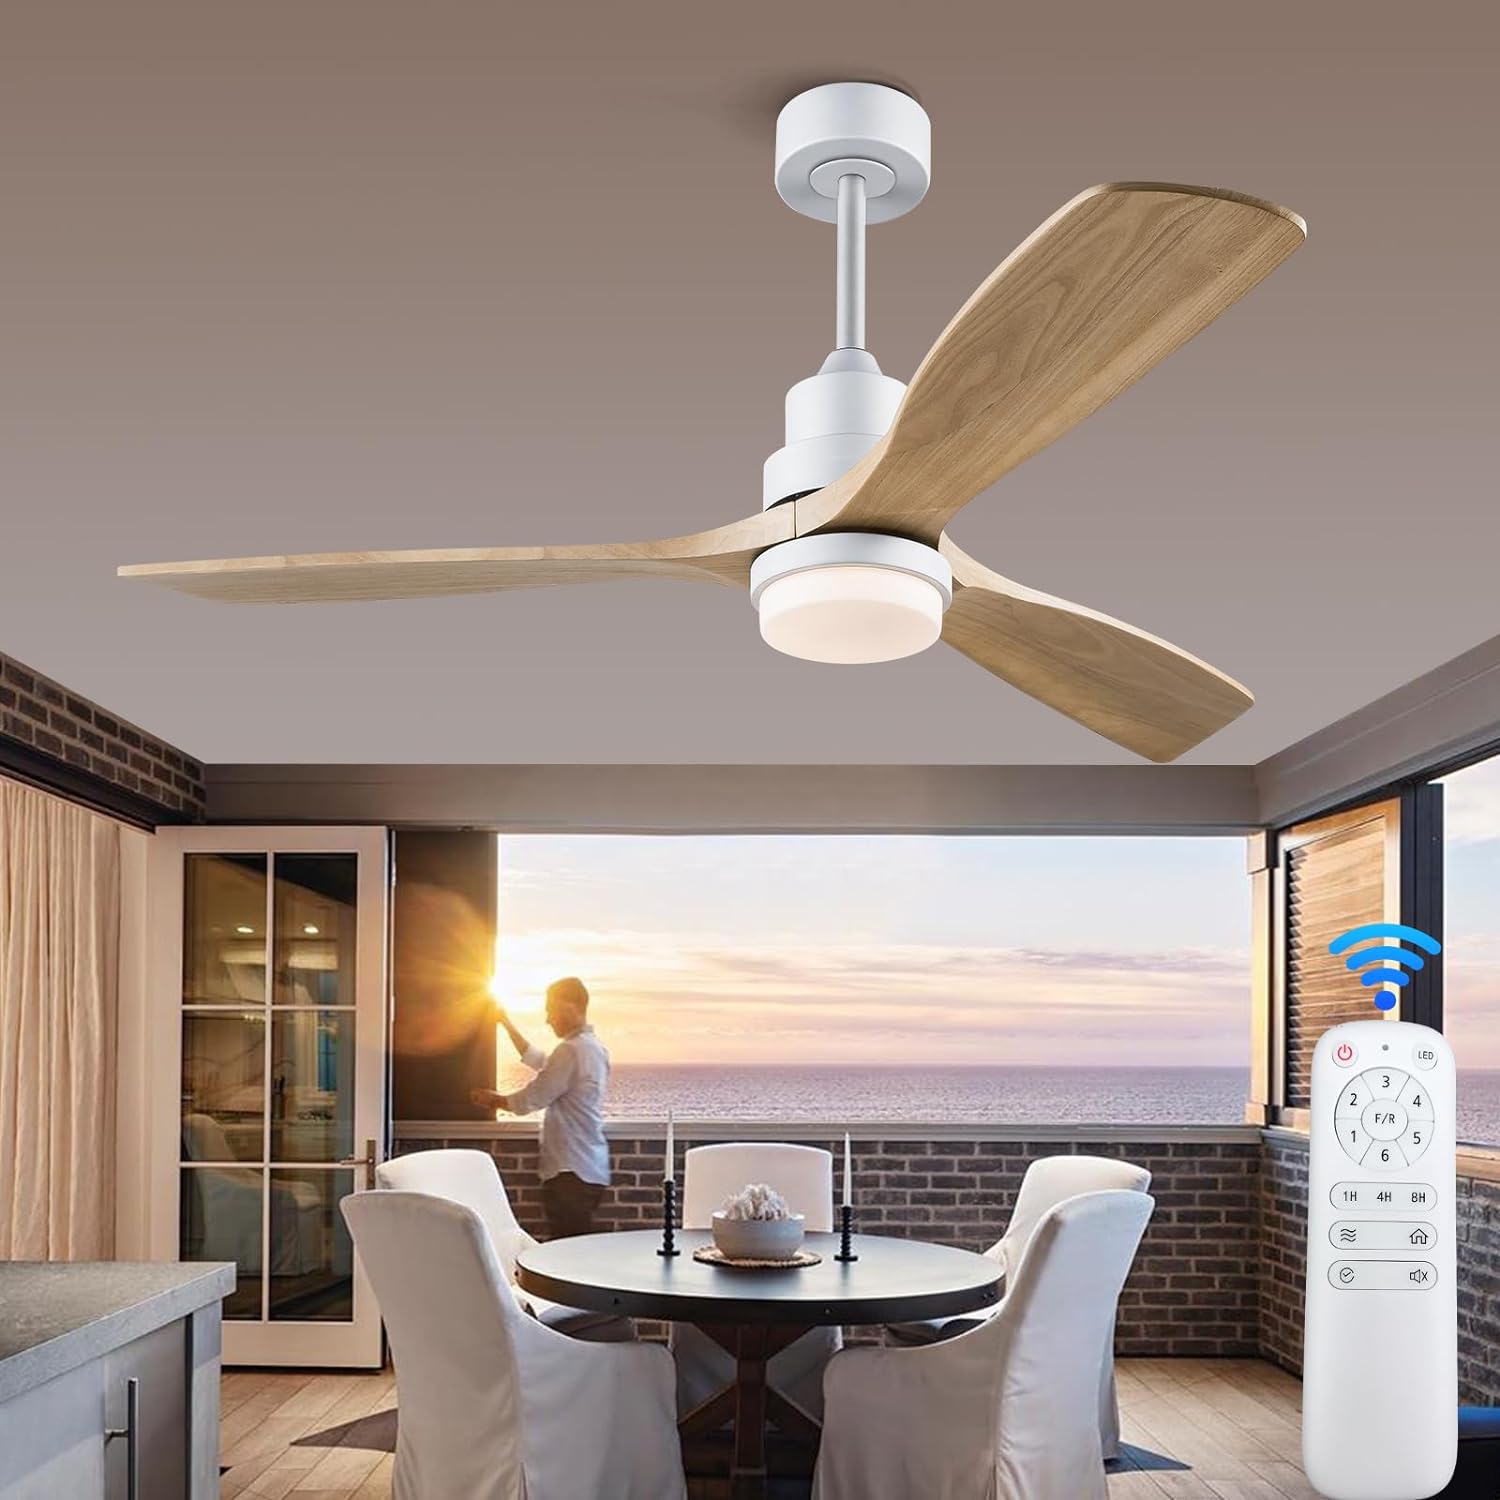 BOJUE 52 Ceiling Fans with Light Remote Control,Indoor Outdoor Ceiling Fan for Patio Living Room,Bedroom,Office,Summer House,Etc